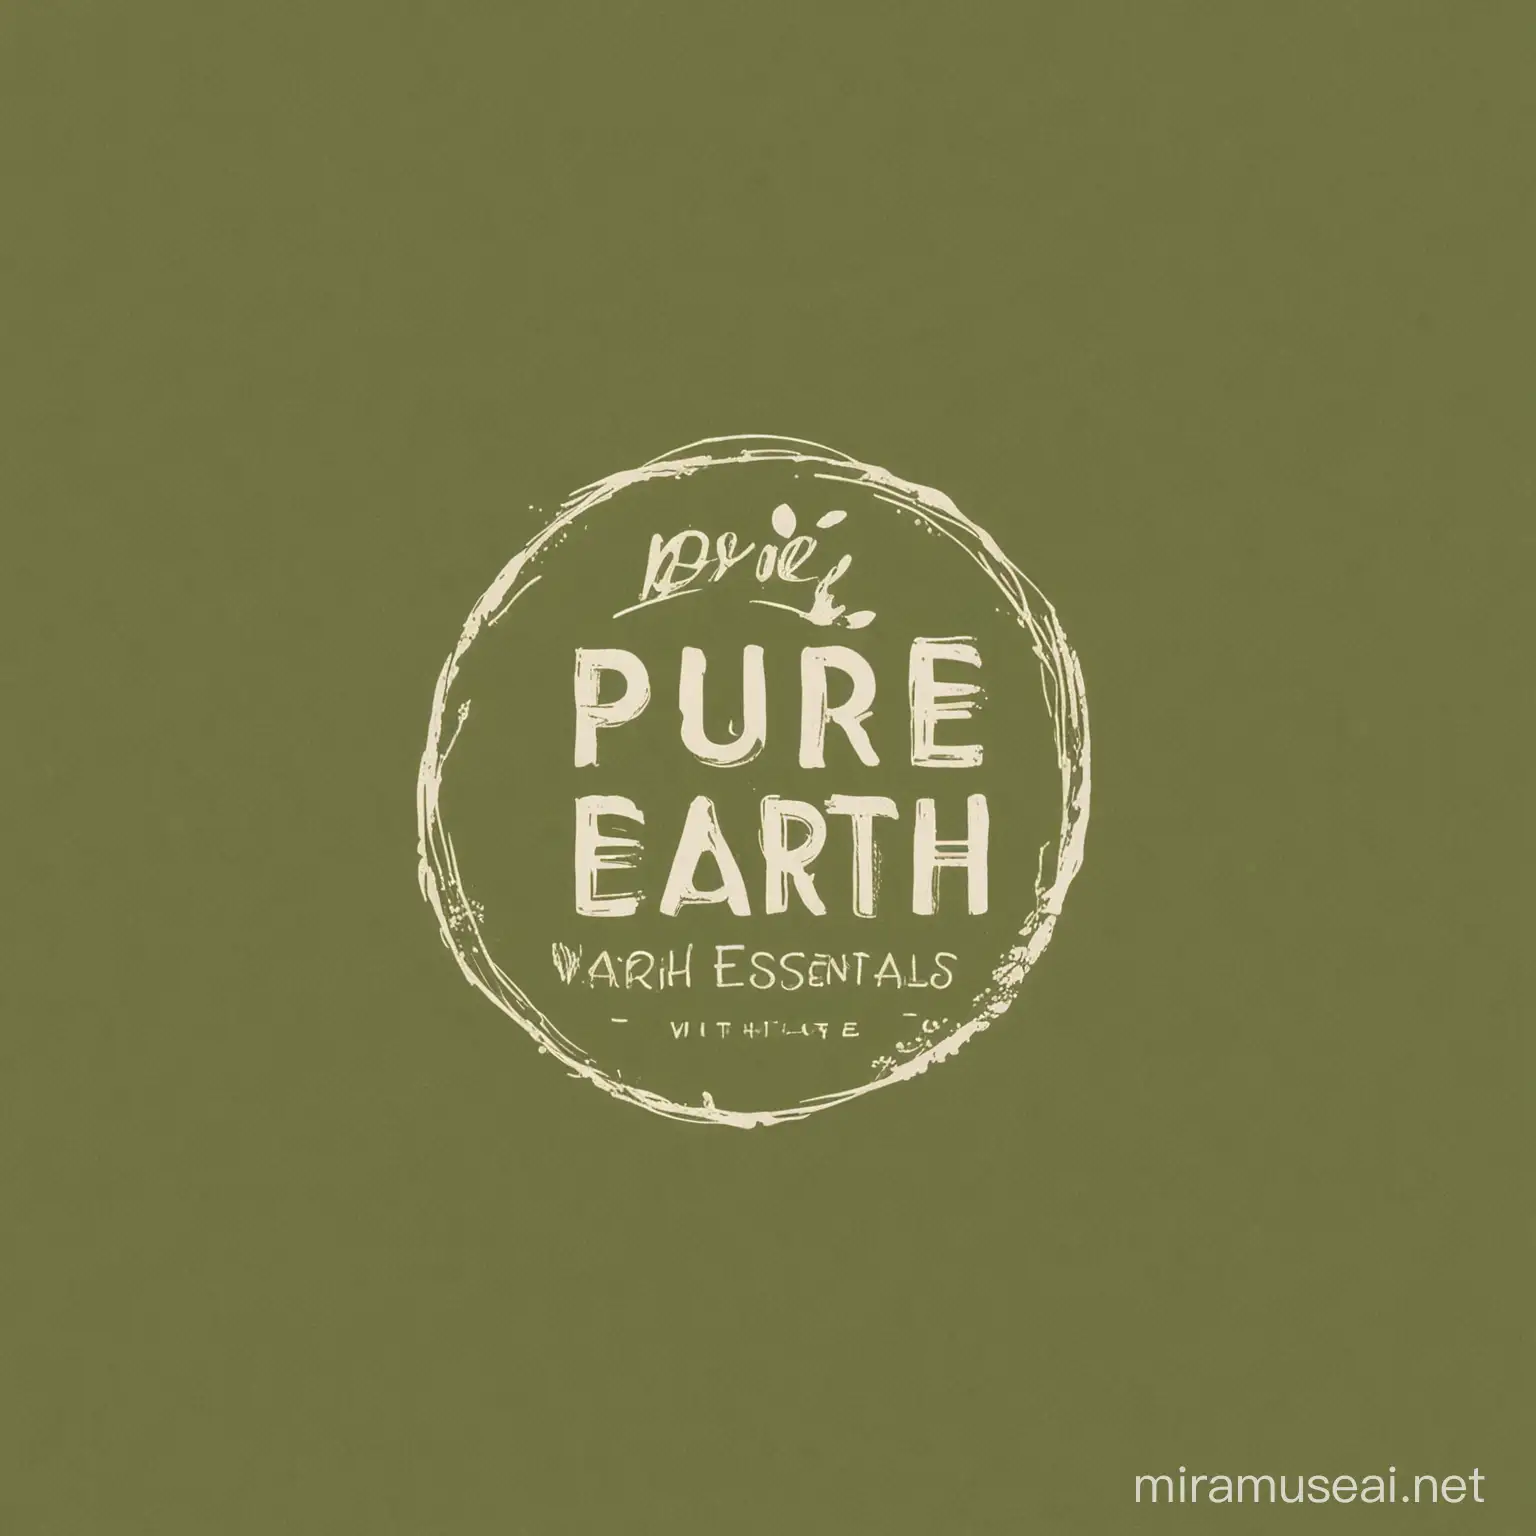 Pure Earth Essentials Logo Design on Olive Green Background